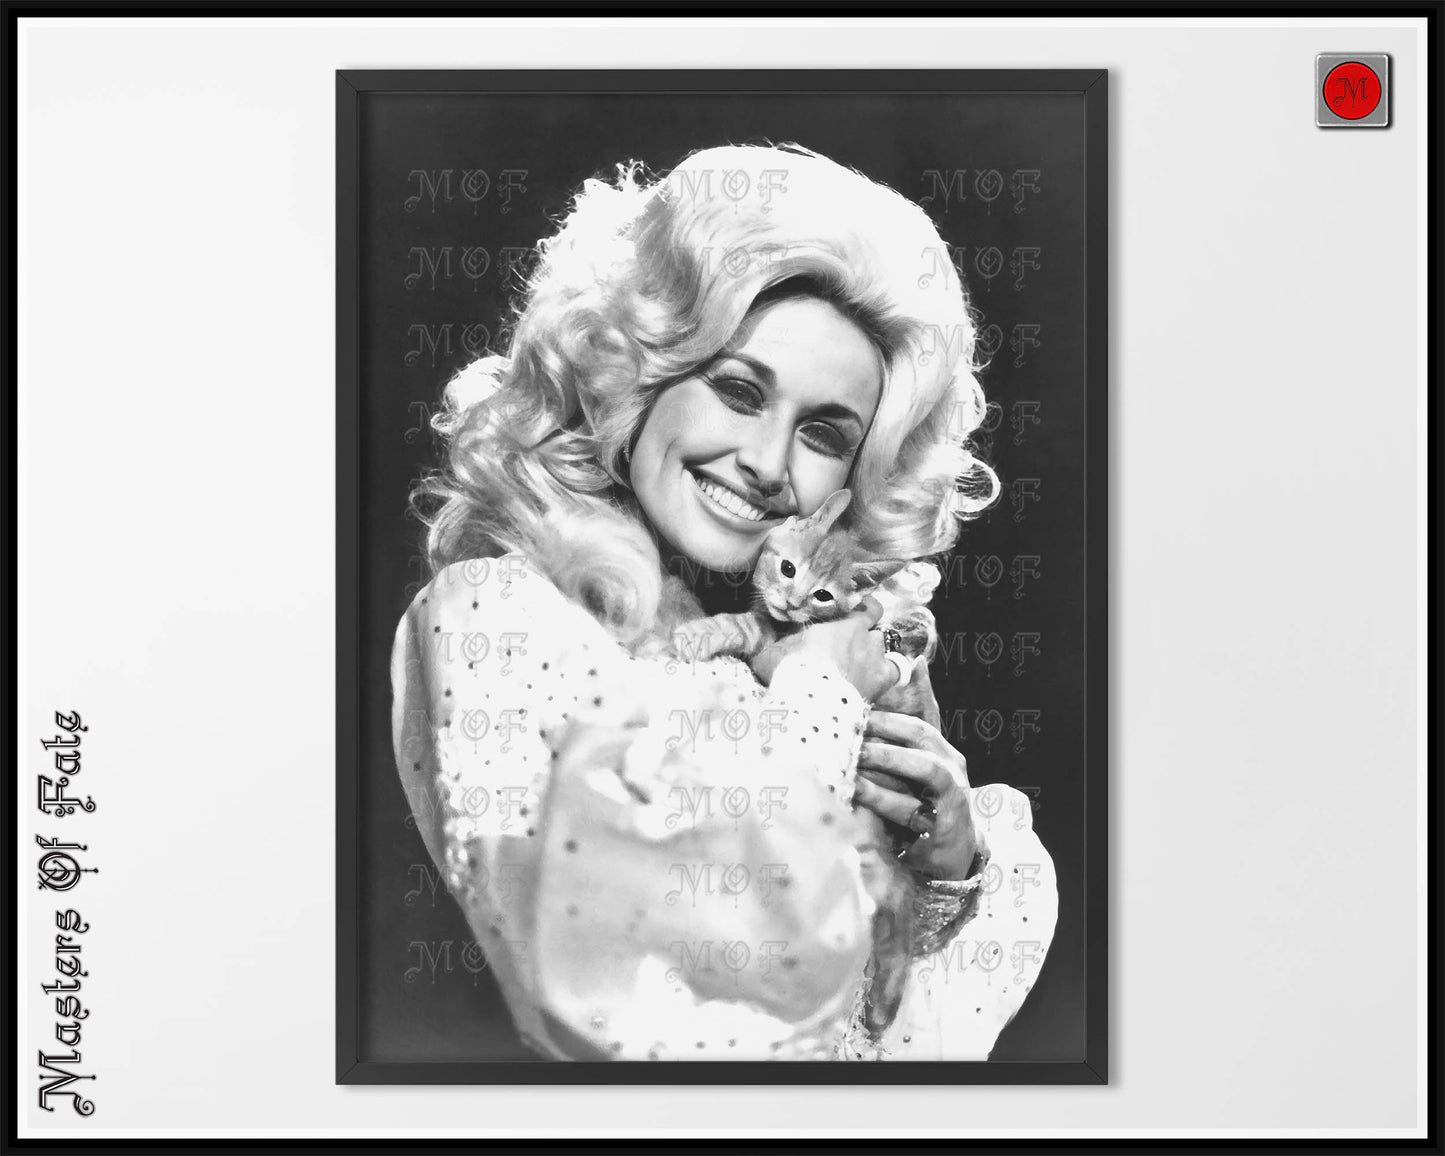 Dolly Parton Cat Print Country Singer Poster REMASTERED